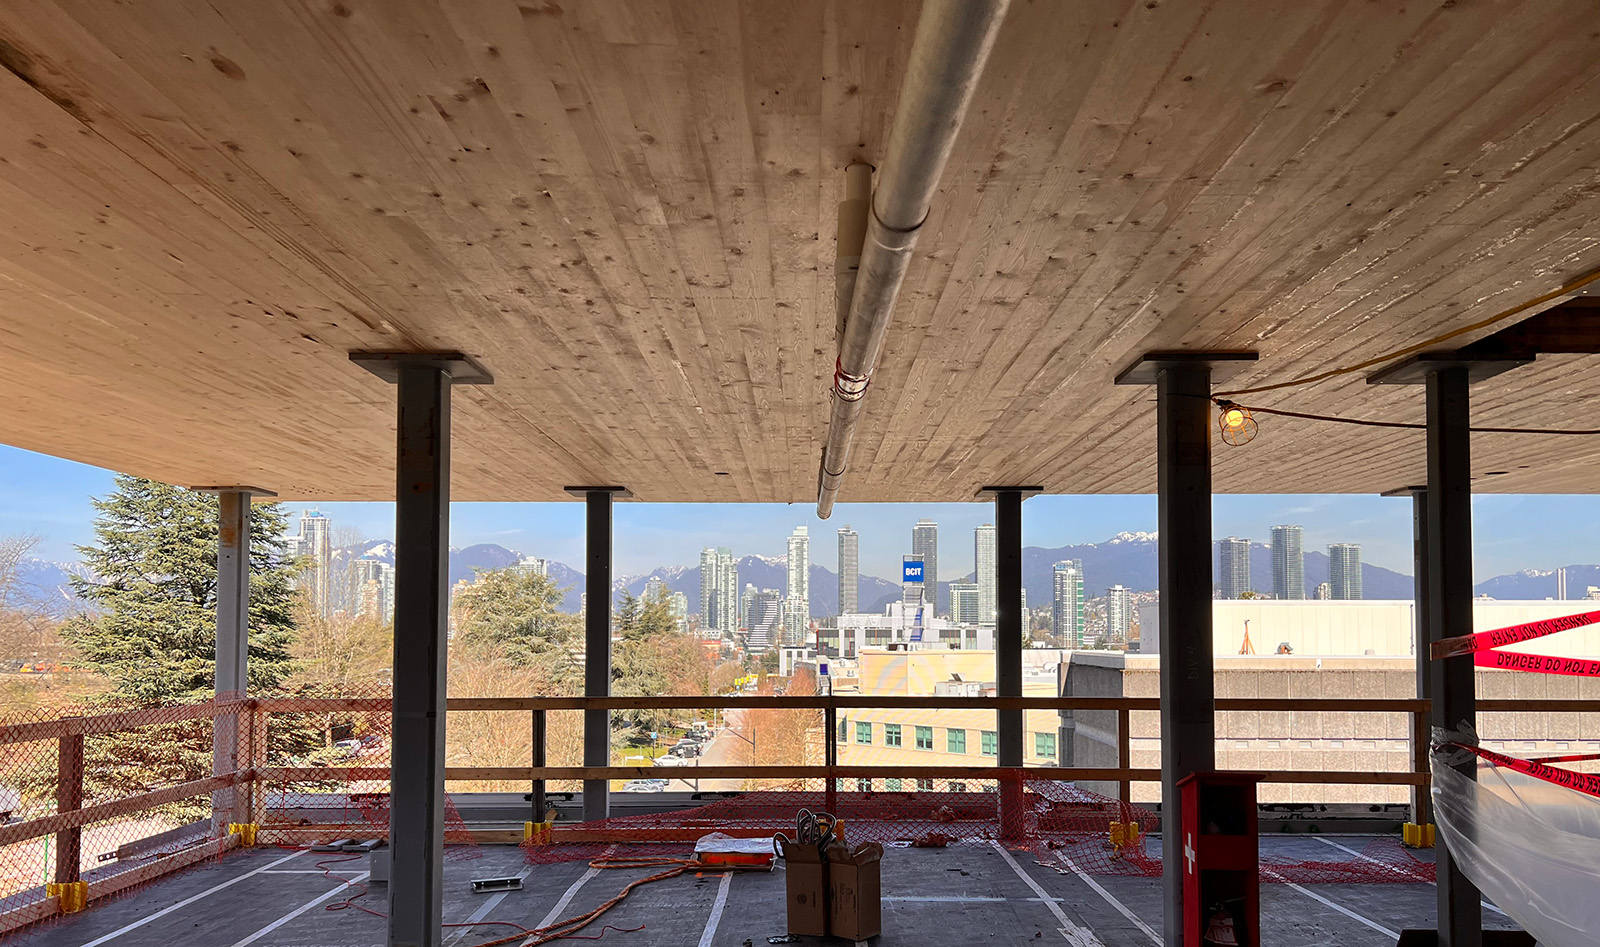 View of the mass timber panels at Tall Timber Student Housing